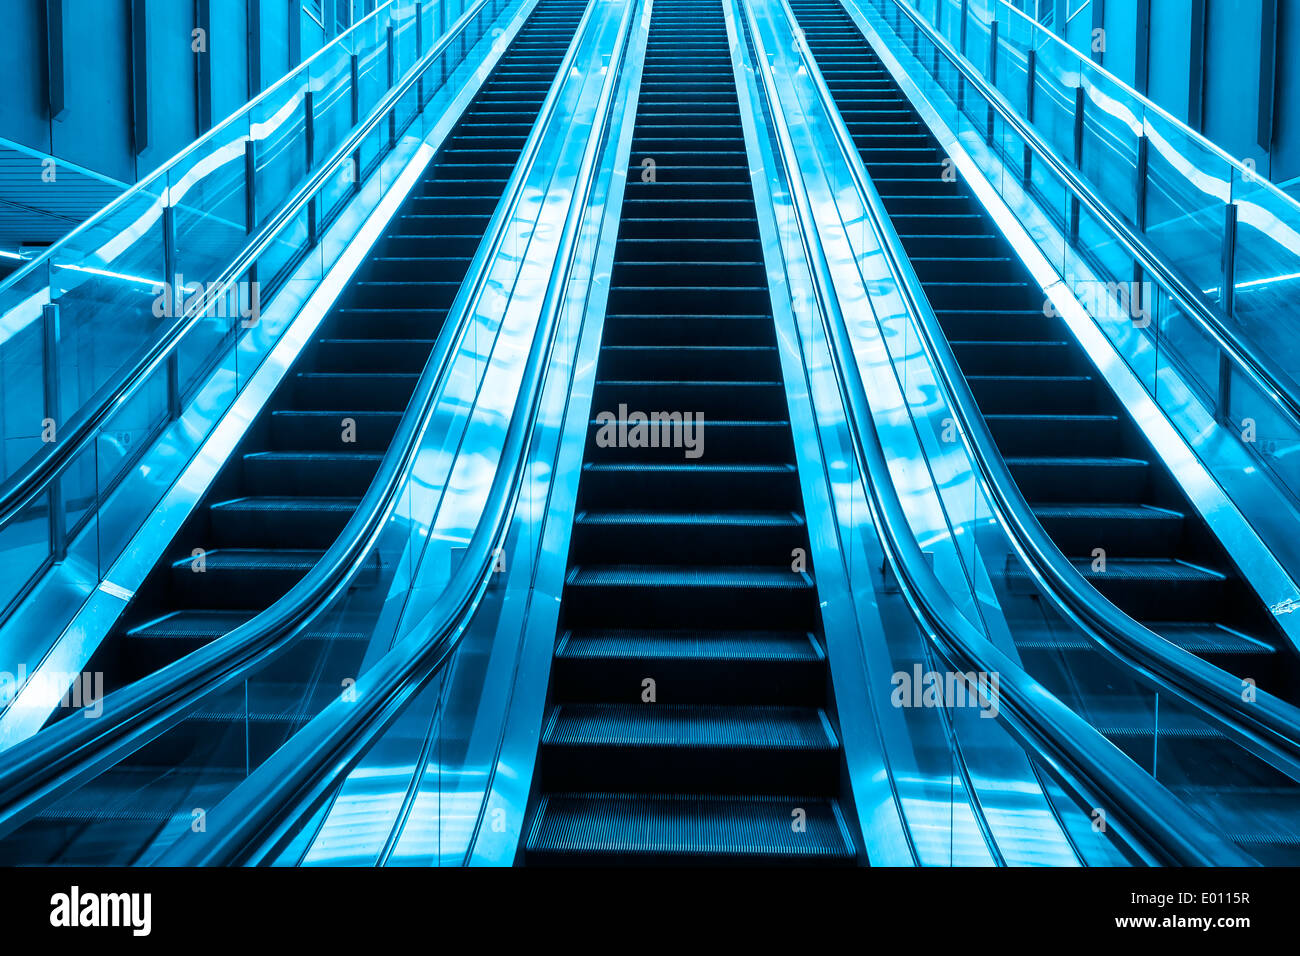 escalator blue two tone color going up stair in building Stock Photo